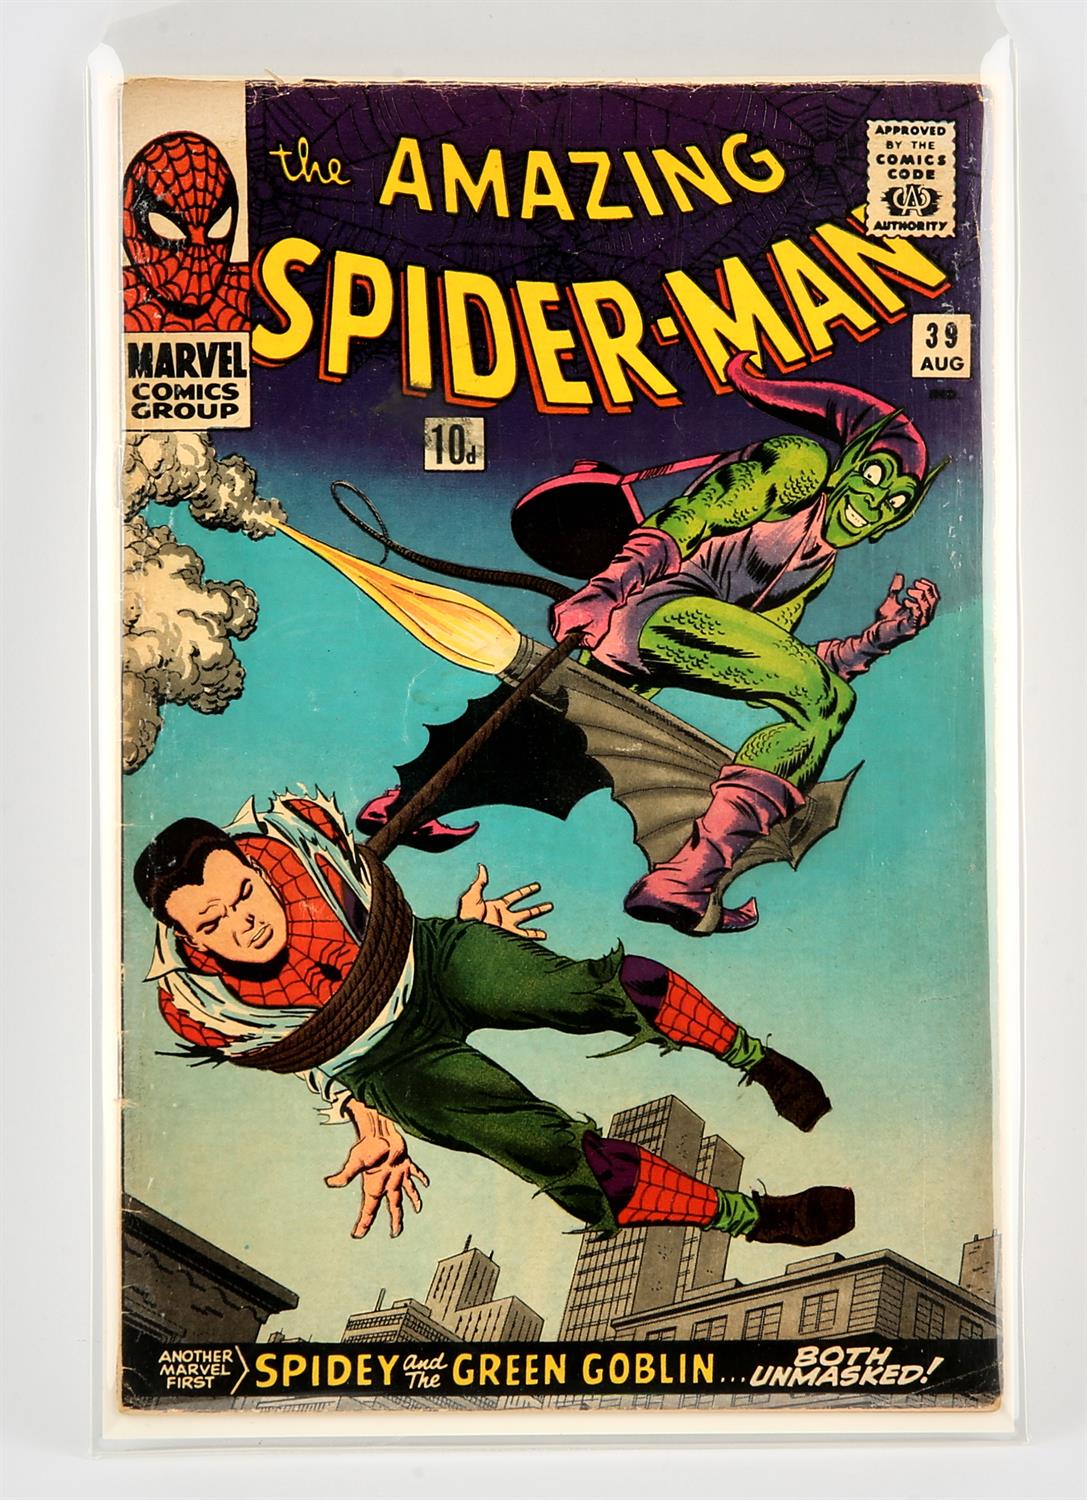 Marvel Comics: The Amazing Spider-Man No. 39 (1966). Normon Osborne revealed to be the Green